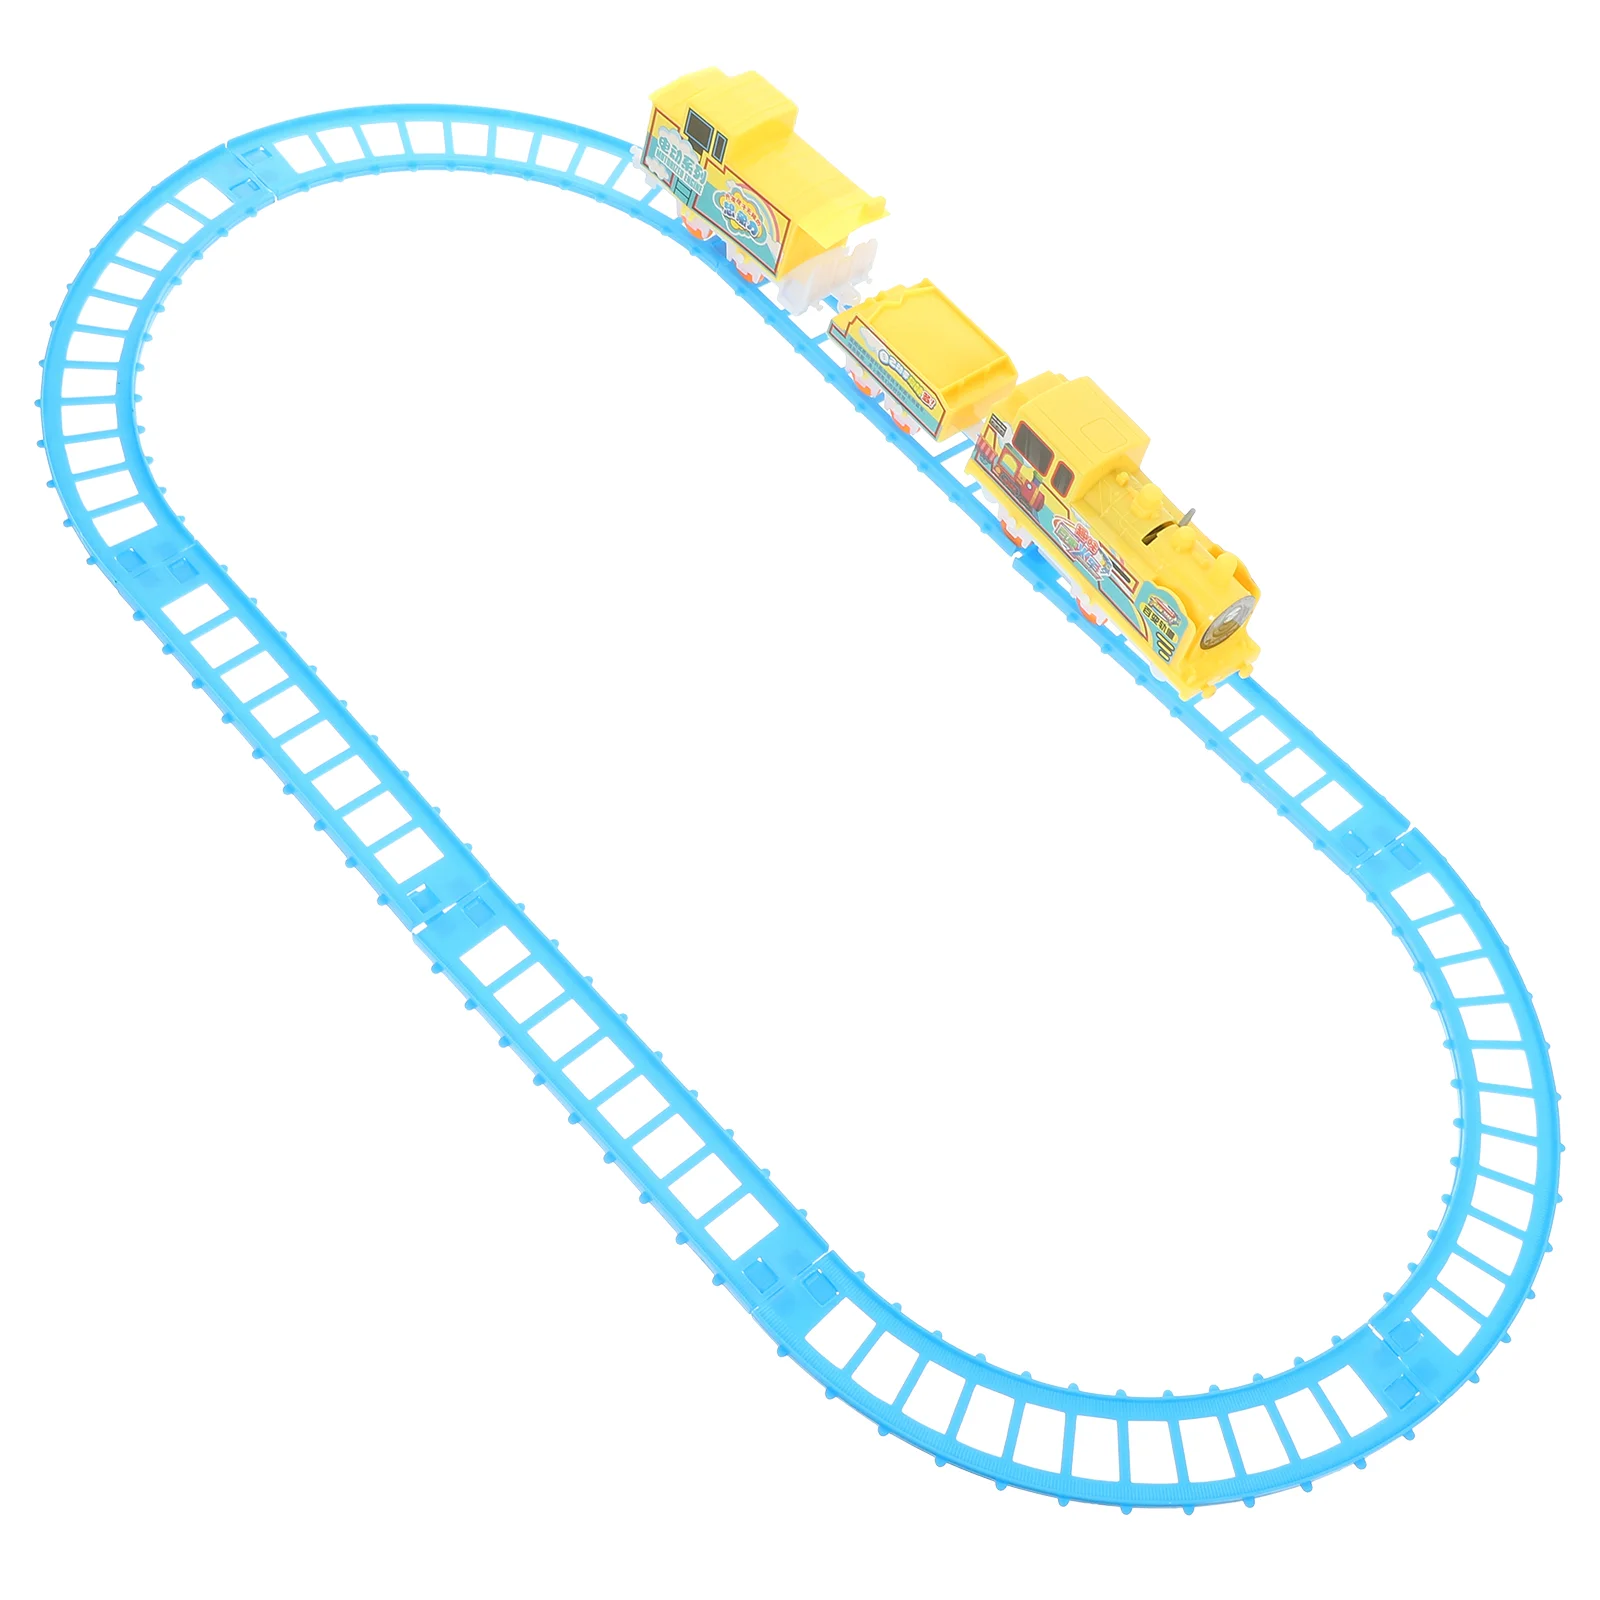 

Track Train Plaything Assemble Toy Classic Rail Christmas Ever-changing Electric Children Kids Plastic Cartoon Toys